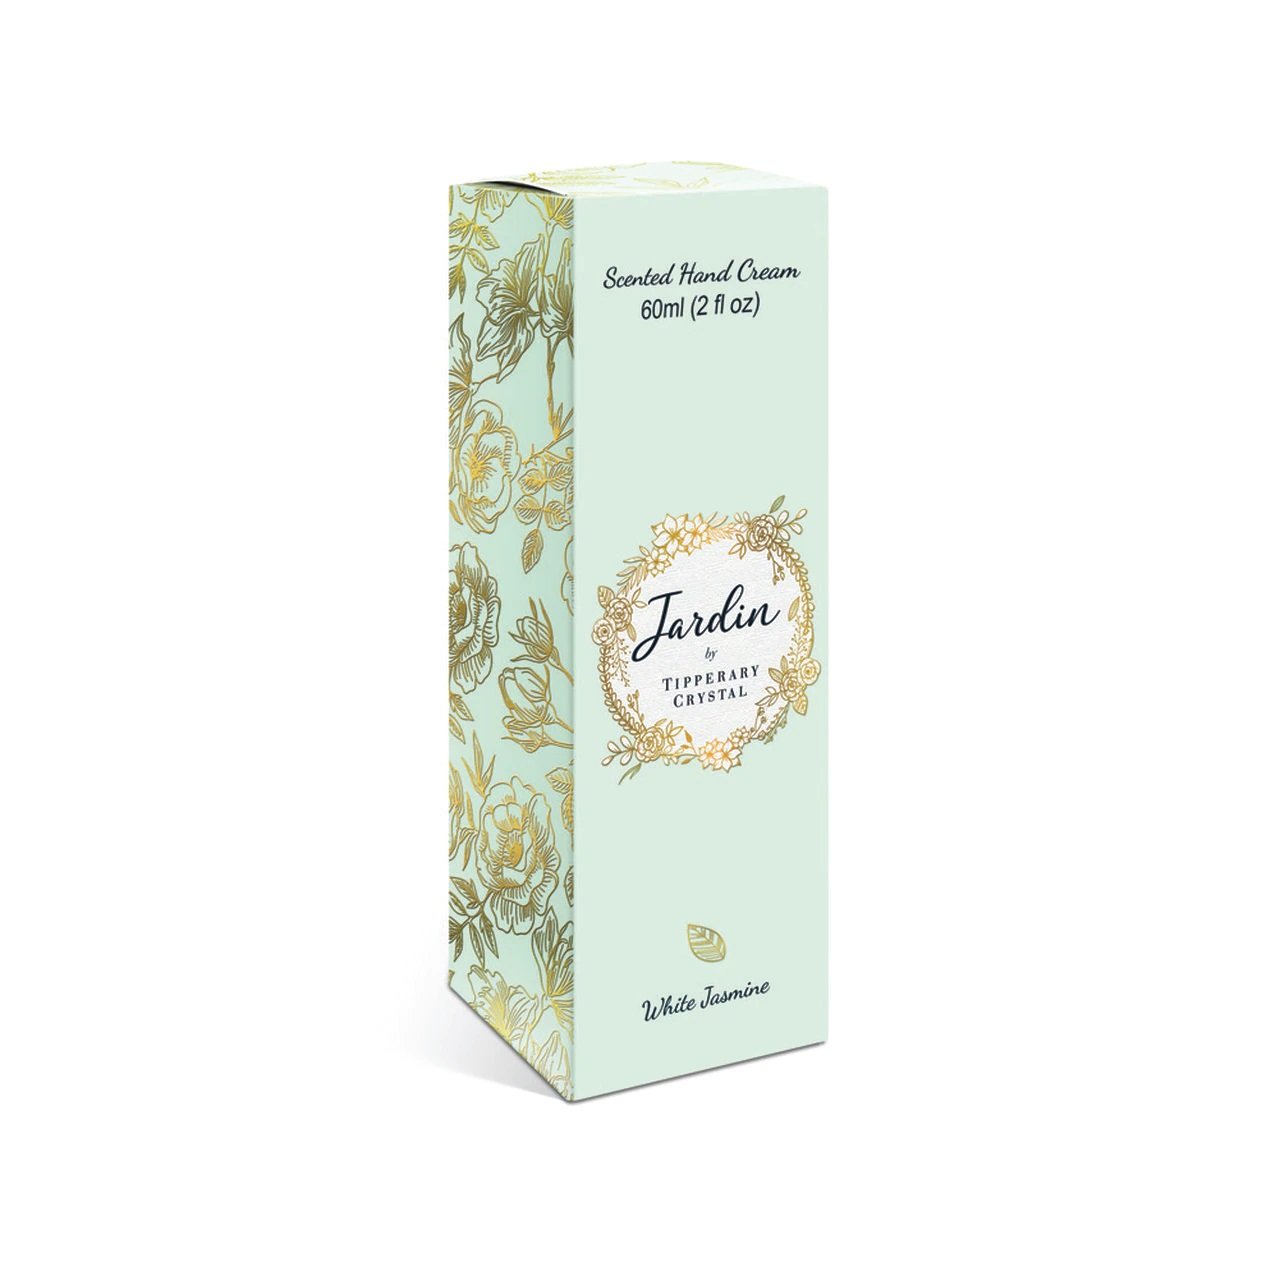 Gorgeous Jardin handcreams from Tipperary Crystal are the ultimate pampering treats and would make a lovely gift for someone special. They come presented in a beautiful keepsake tin. Each moisturising handcream is 60ml.